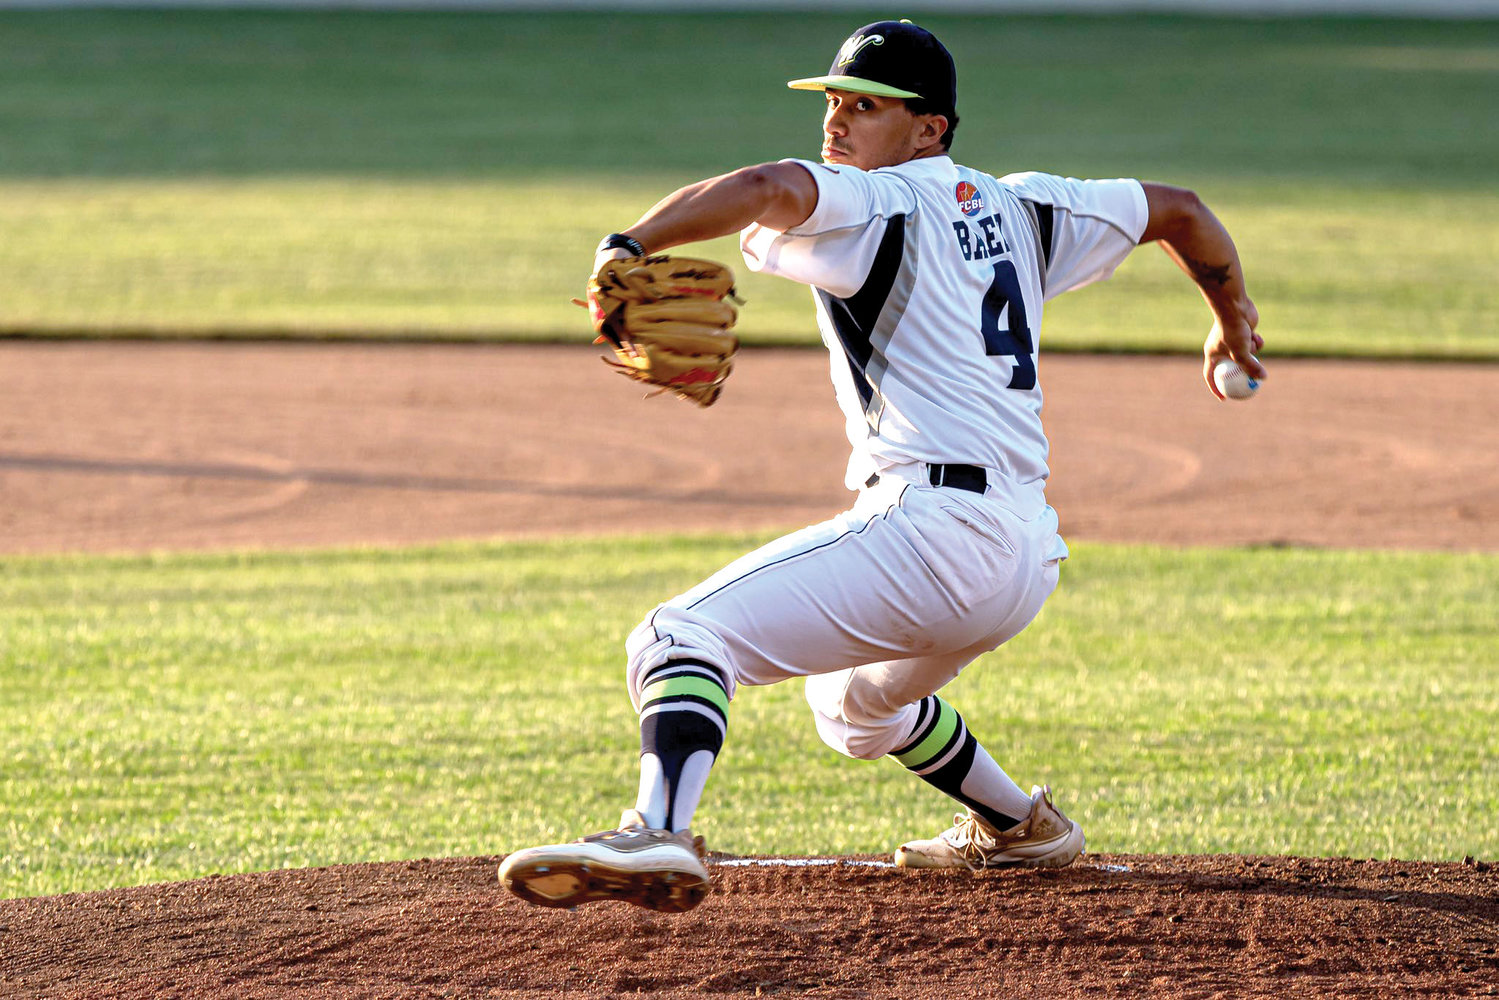 ON THE MOUND—Mount St. Michael Academy graduate Angelo Baez delivers a pitch for the Worcester Bravehearts of the Futures Collegiate Baseball League of New England. Baez, one of the league’s top pitchers, will begin his postgraduate studies at St. Thomas Aquinas College in Sparkill during the 2020-2021 school year after the NCAA granted him an additional year of baseball eligibility when the Covid-19 pandemic canceled STAC’s season after 14 games in March.